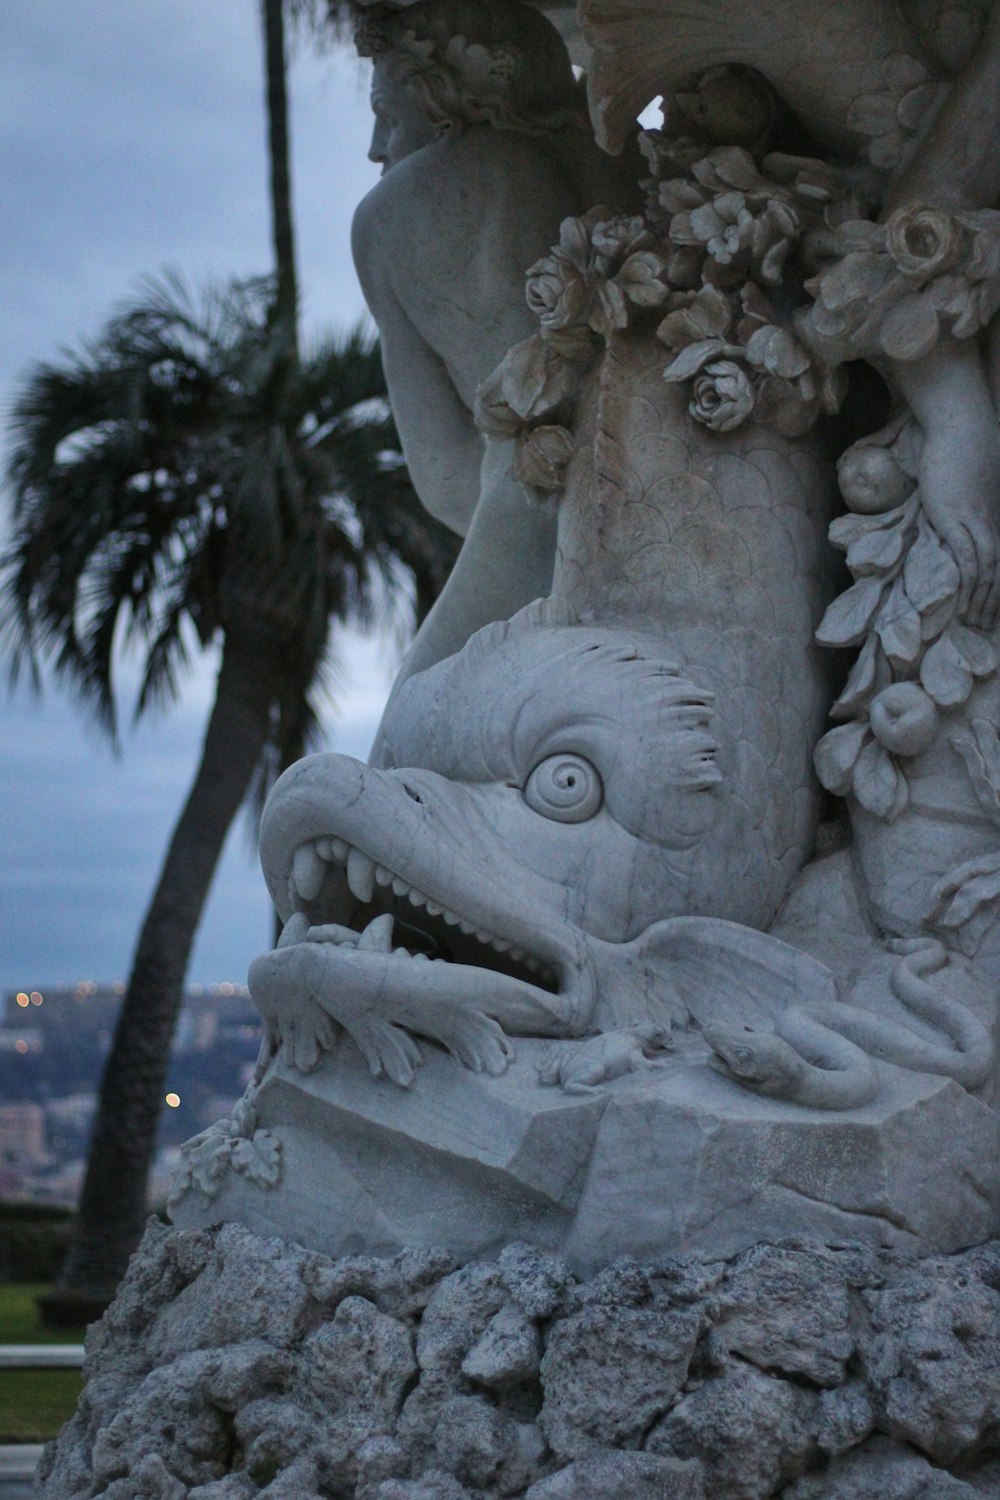 a statue of a dragon on a rock with a palm tree in the background